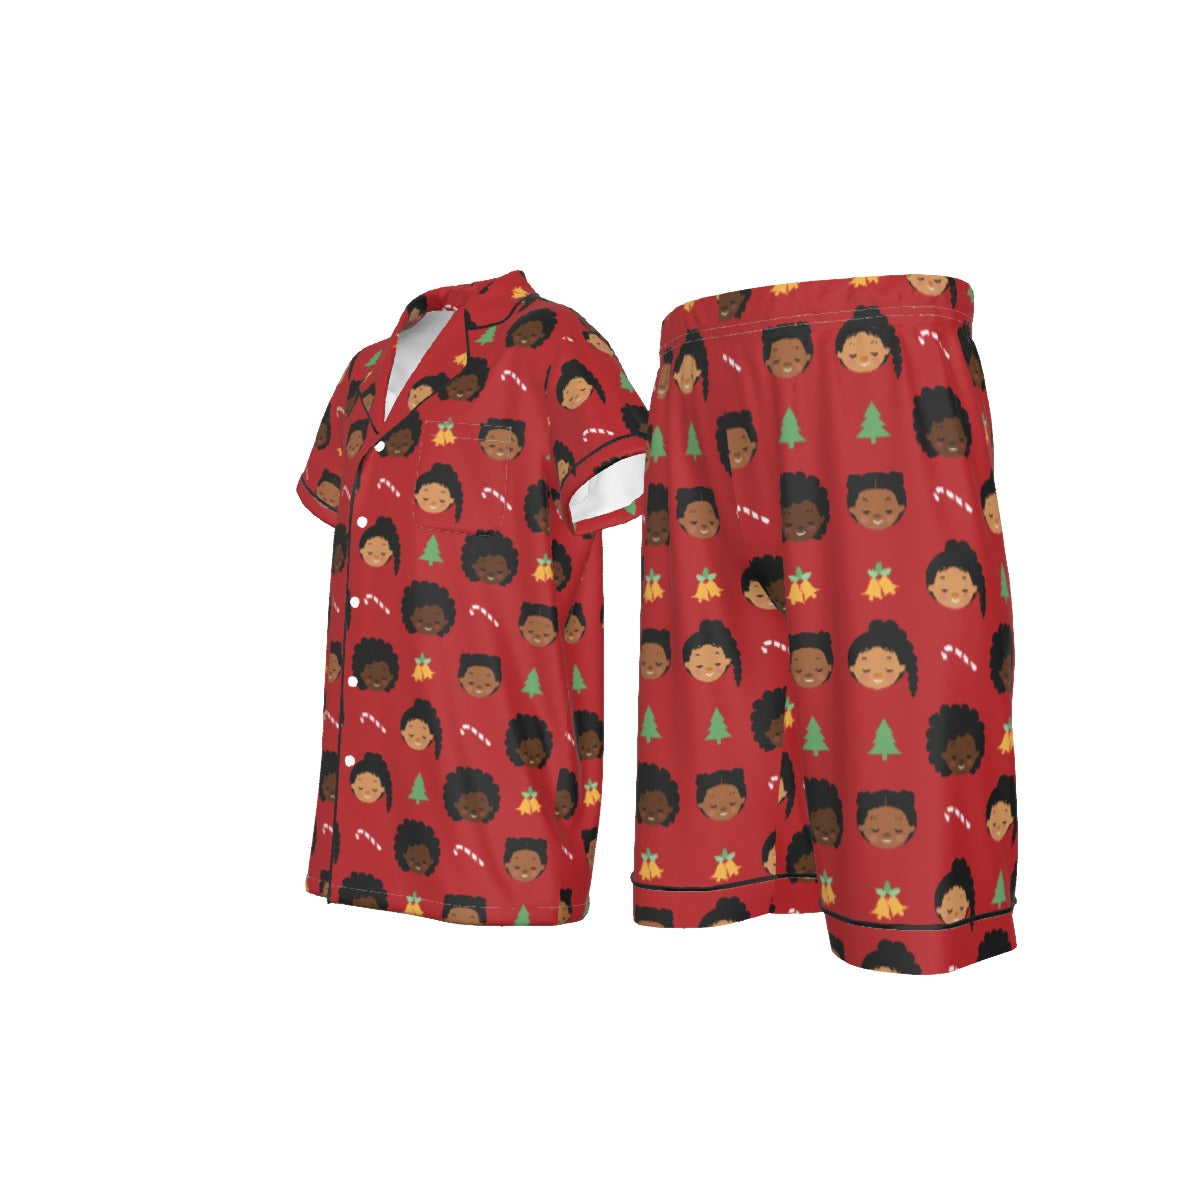 She’s Ready for Christmas satin pajama set for girls (red)